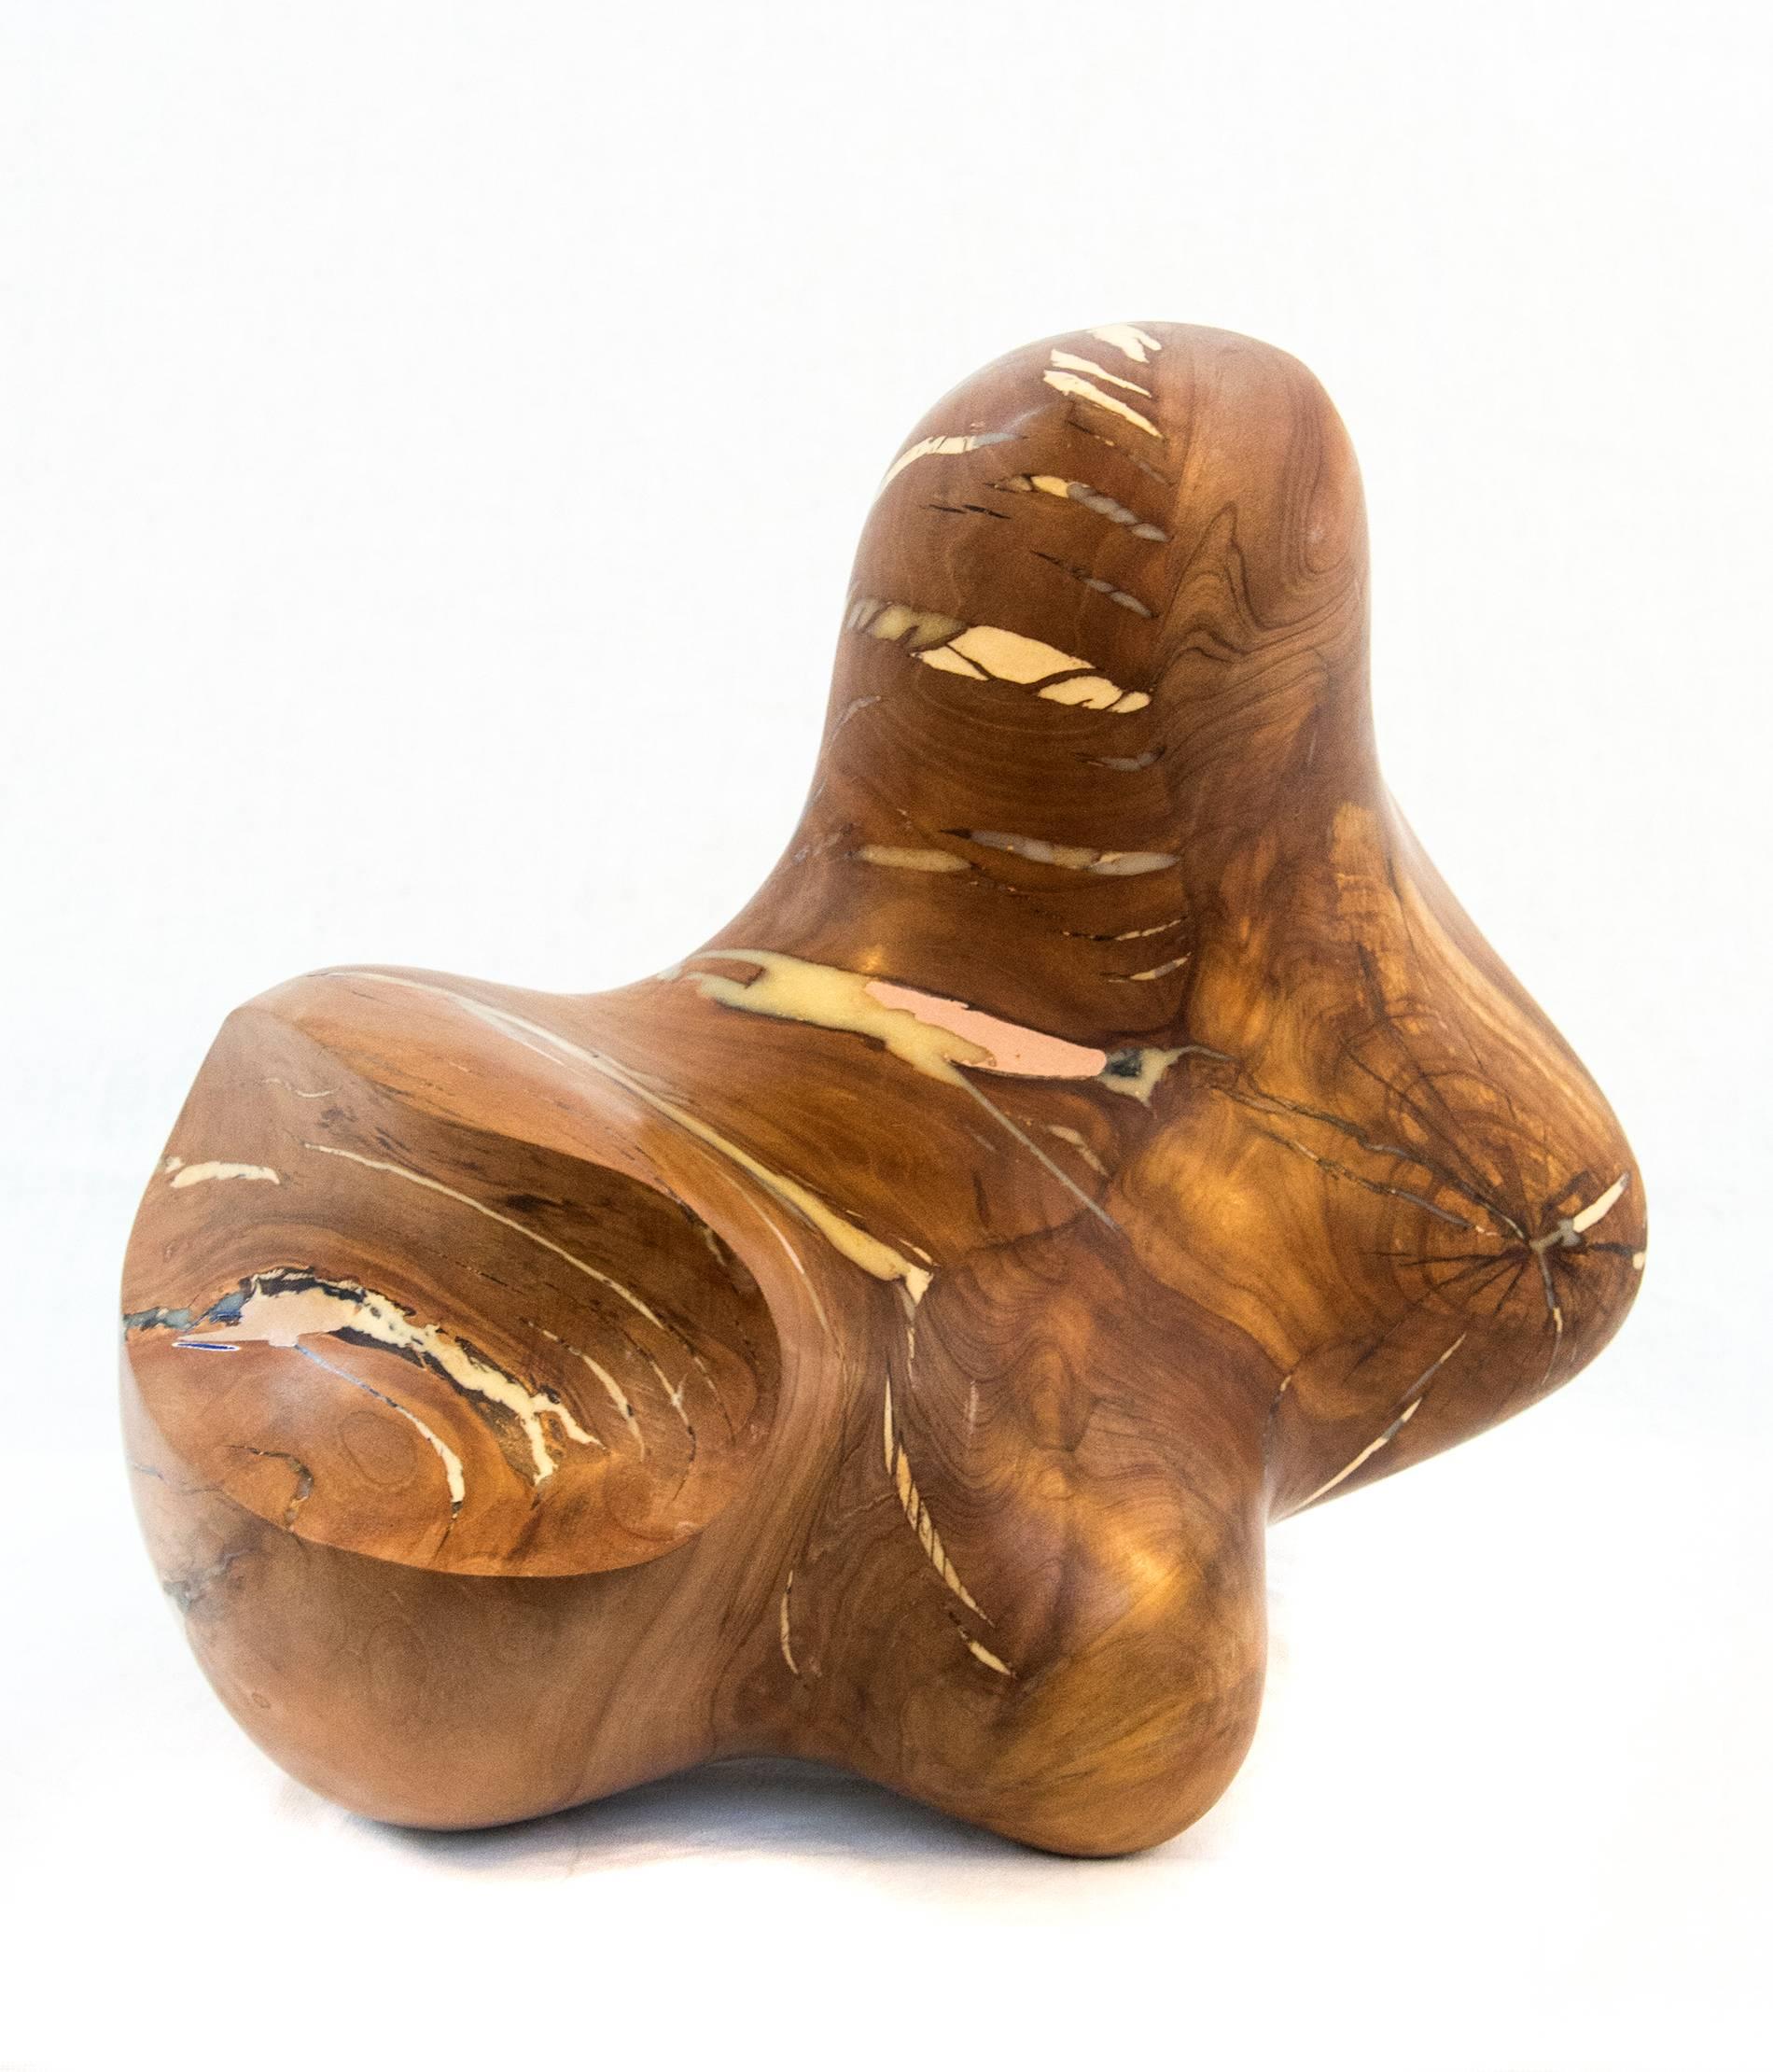 Windfall Series No 07 - smooth, polished, natural wood abstract carved sculpture - Contemporary Sculpture by Shayne Dark